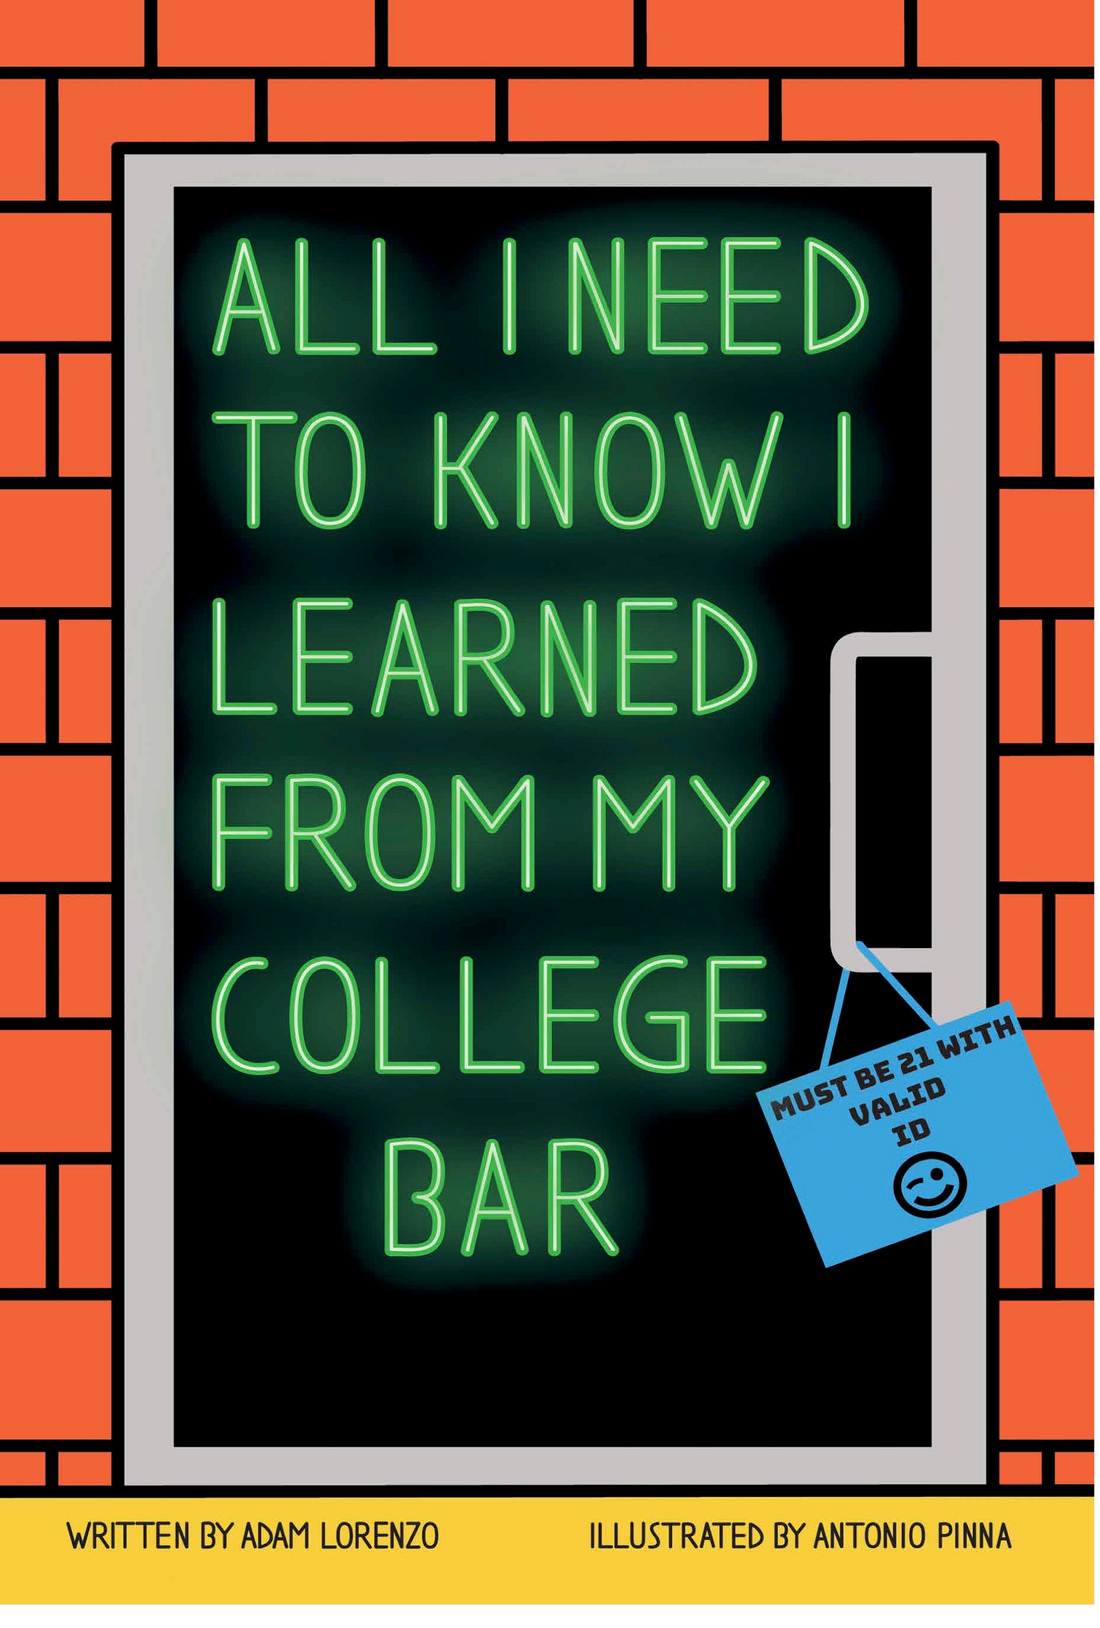 Survive College 101: Bestselling Guide "All I Need To Know I Learned From My College Bar"